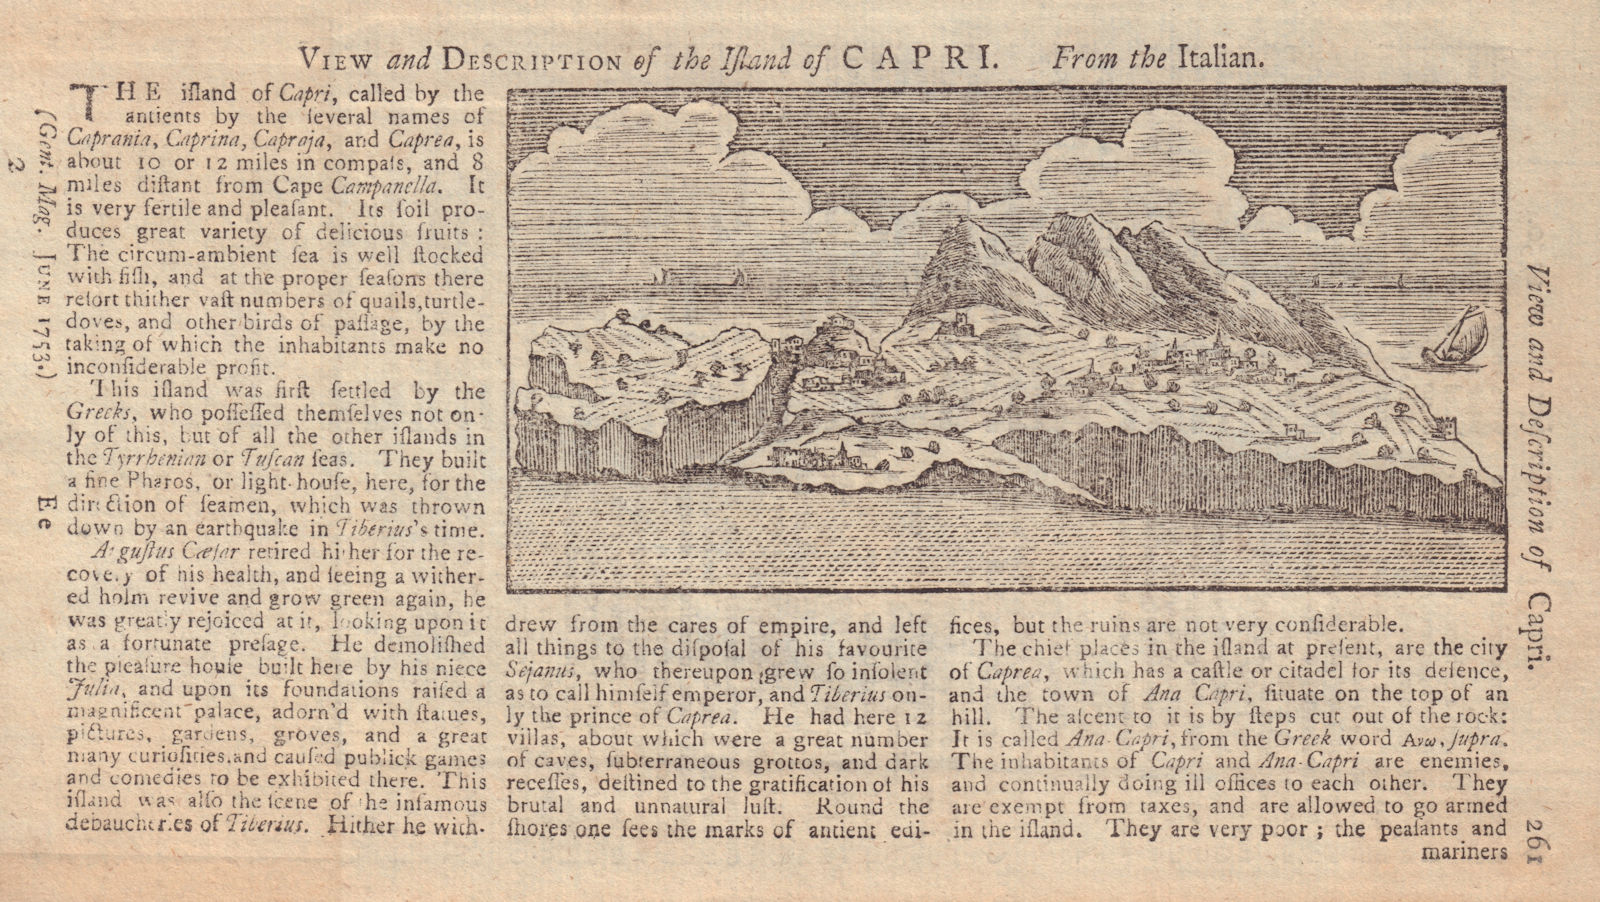 View and Description of the Island of Capri, Italy. GENTS MAG 1753 old print